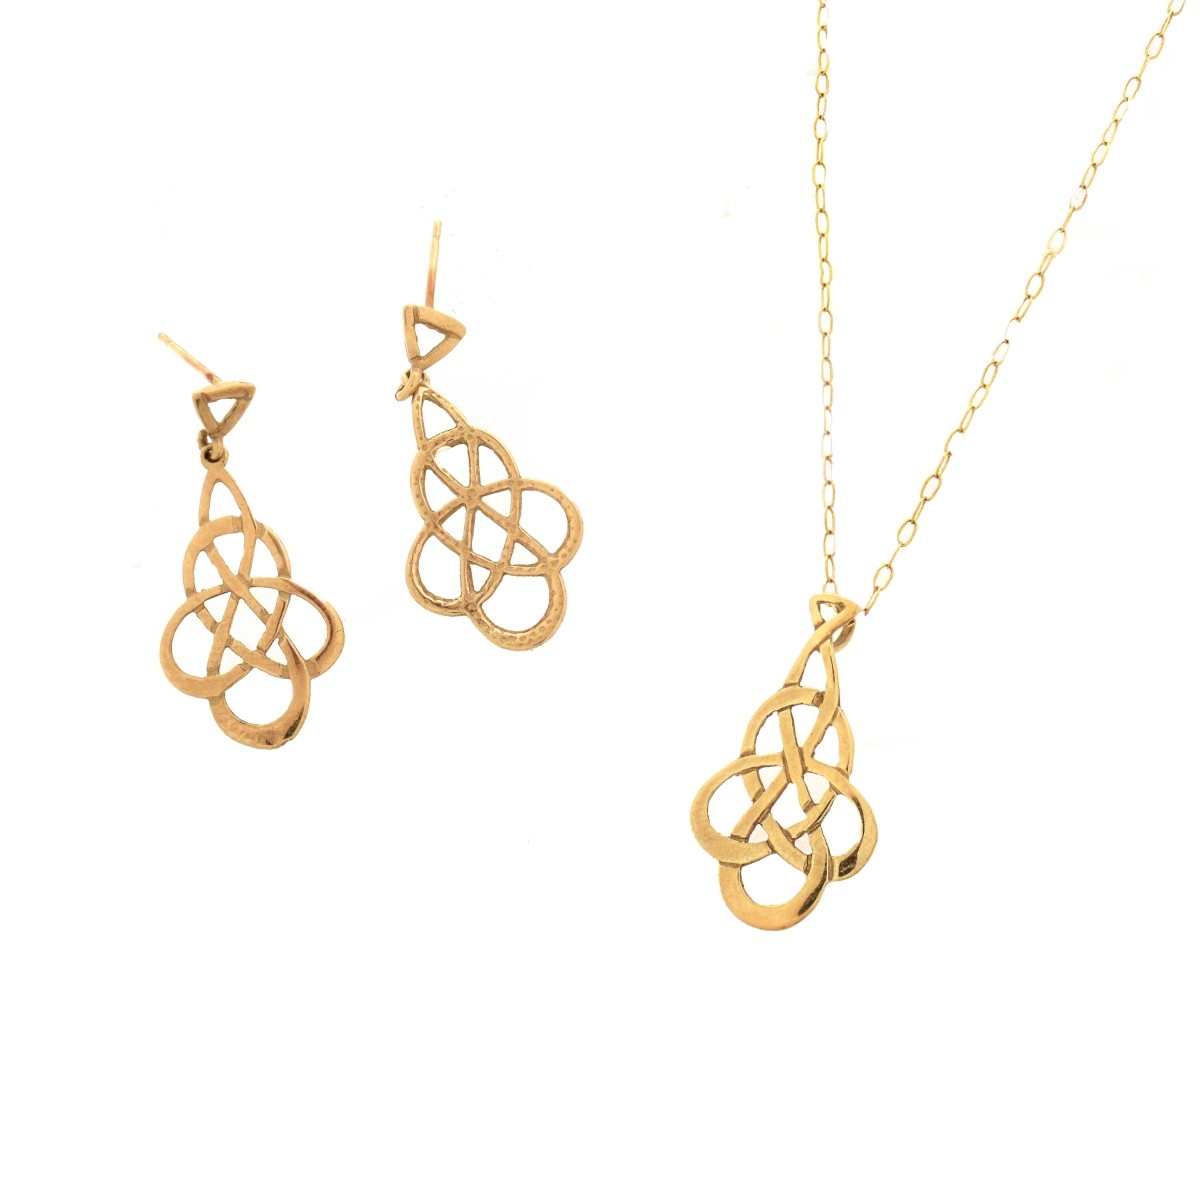 9K Gold Necklace and Earrings